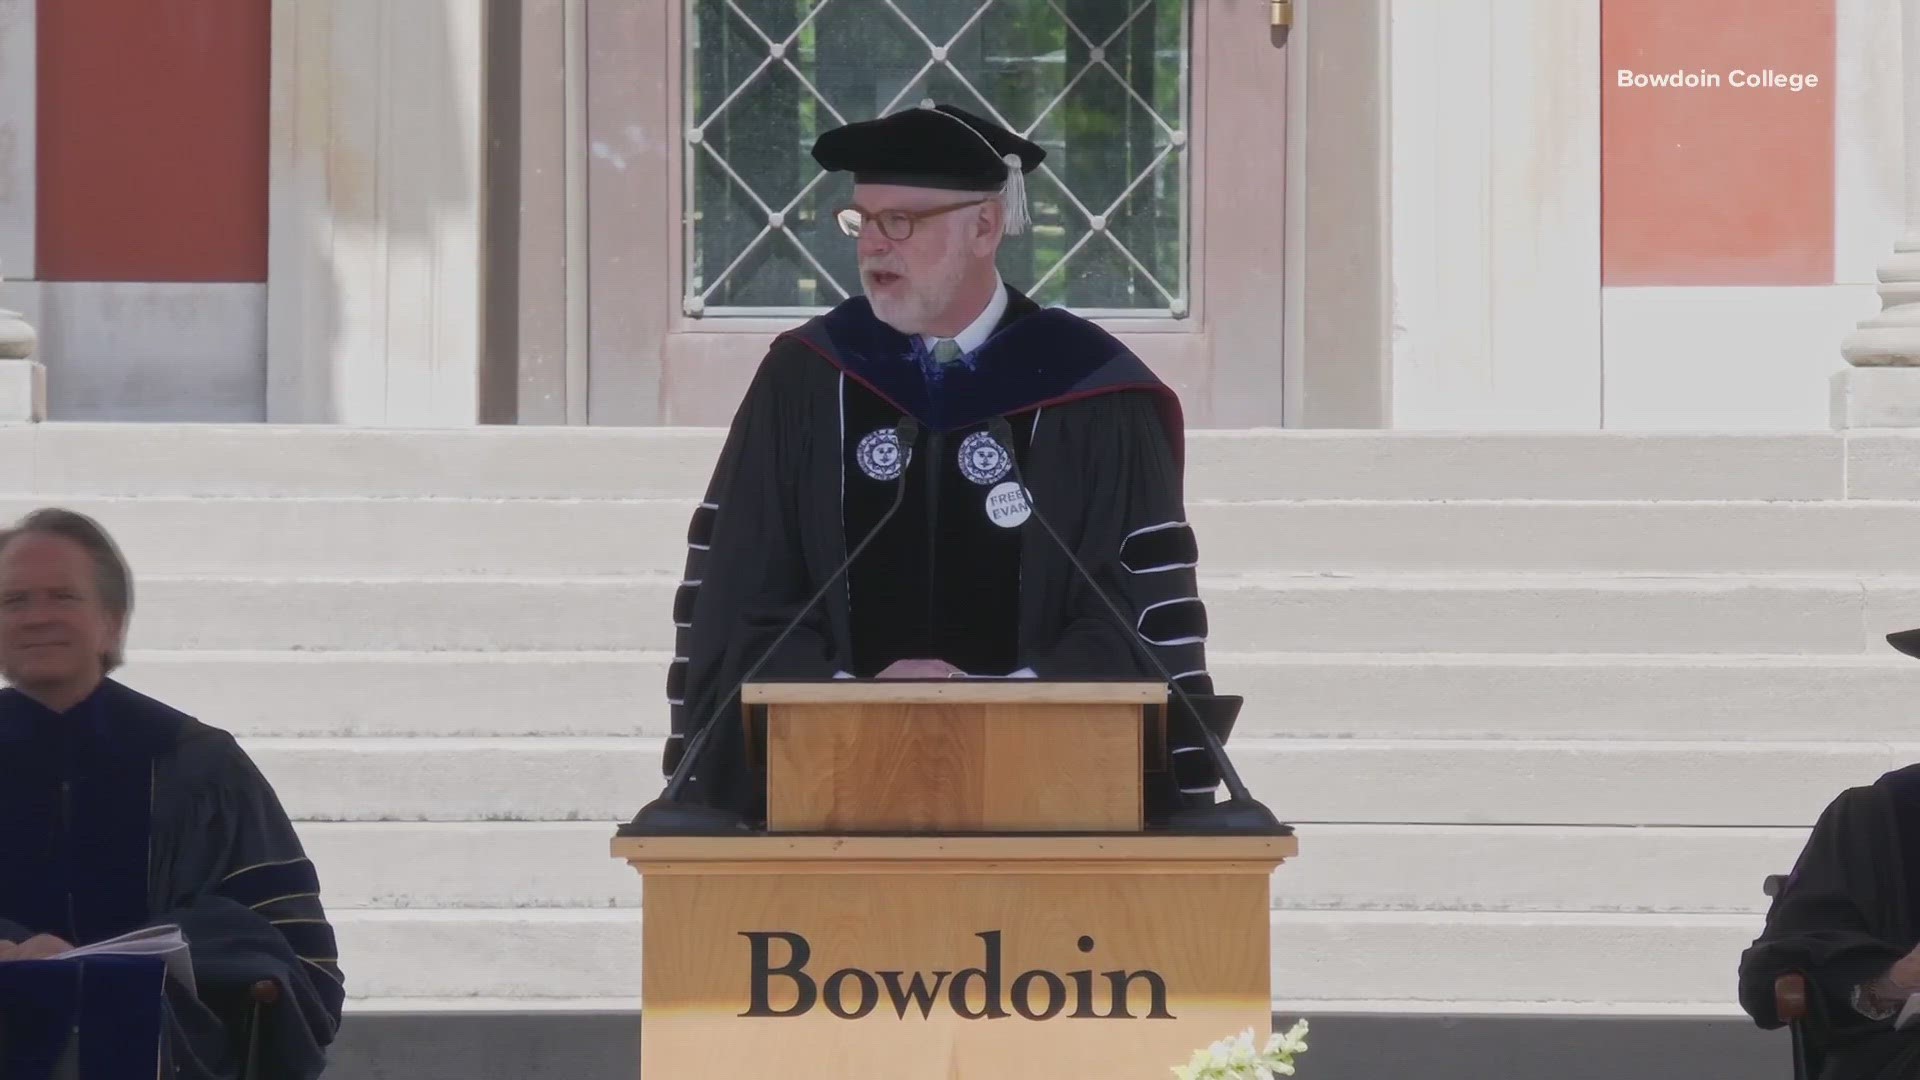 Bowdoin College President Clayton Rose honored former graduates Evan Gershkovich and Justin Pearson at Saturday's commencement.